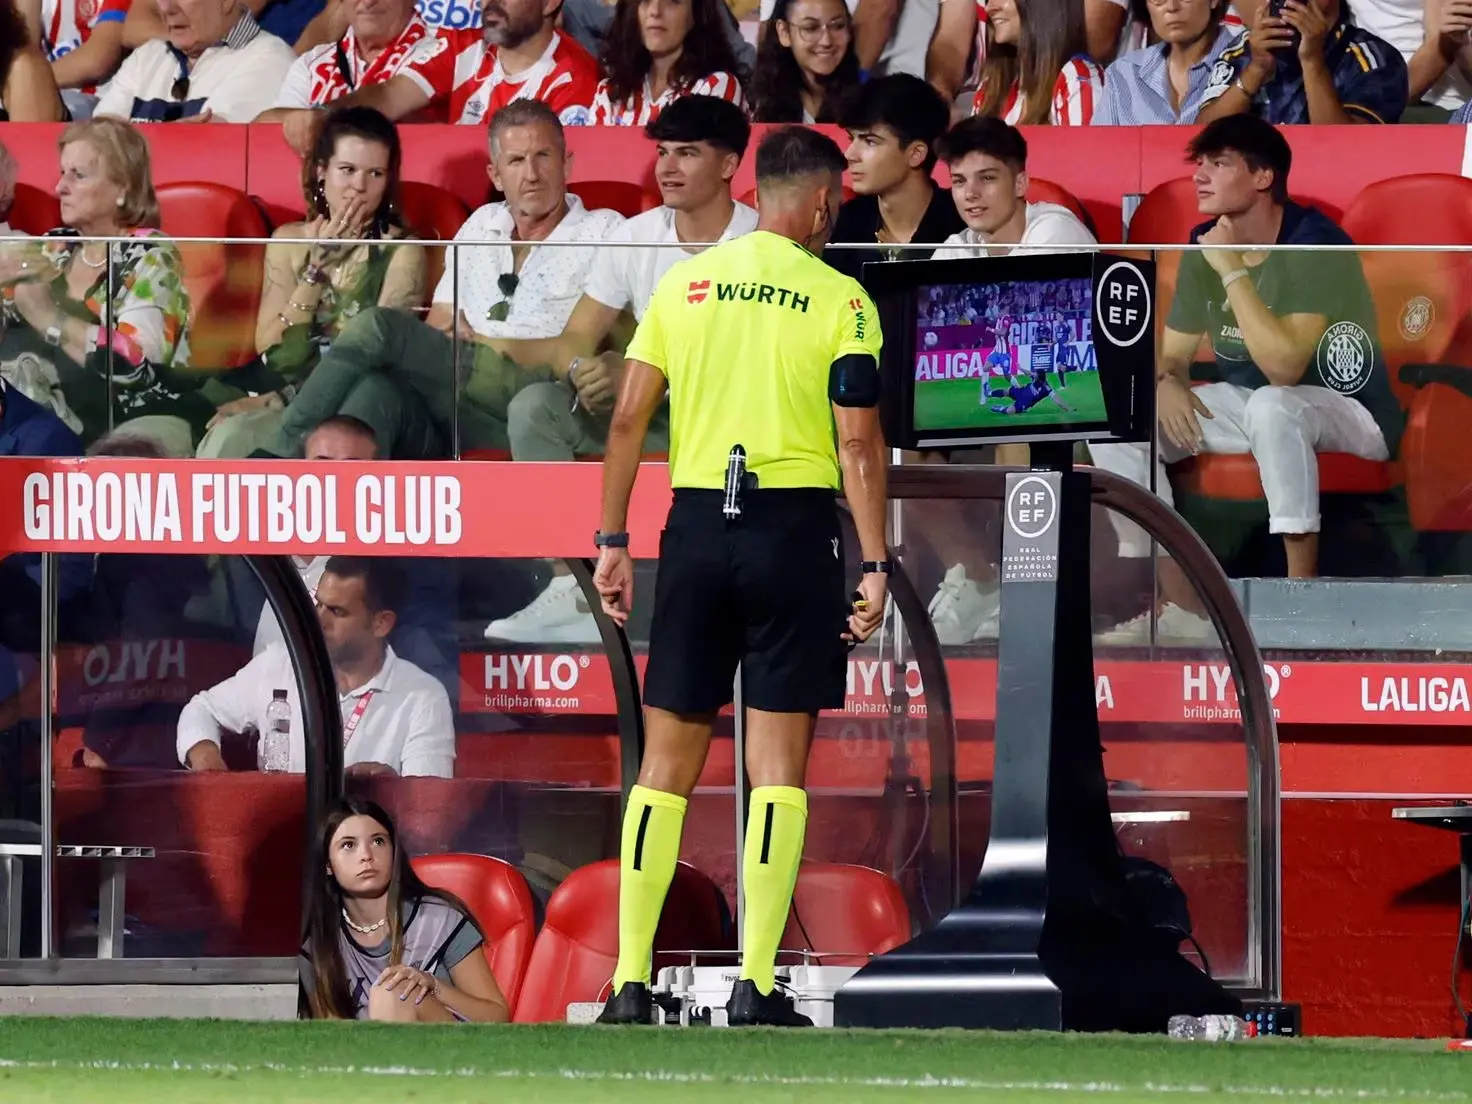 Referee in spain looking at the VAR monitor to decide if his call was right or not